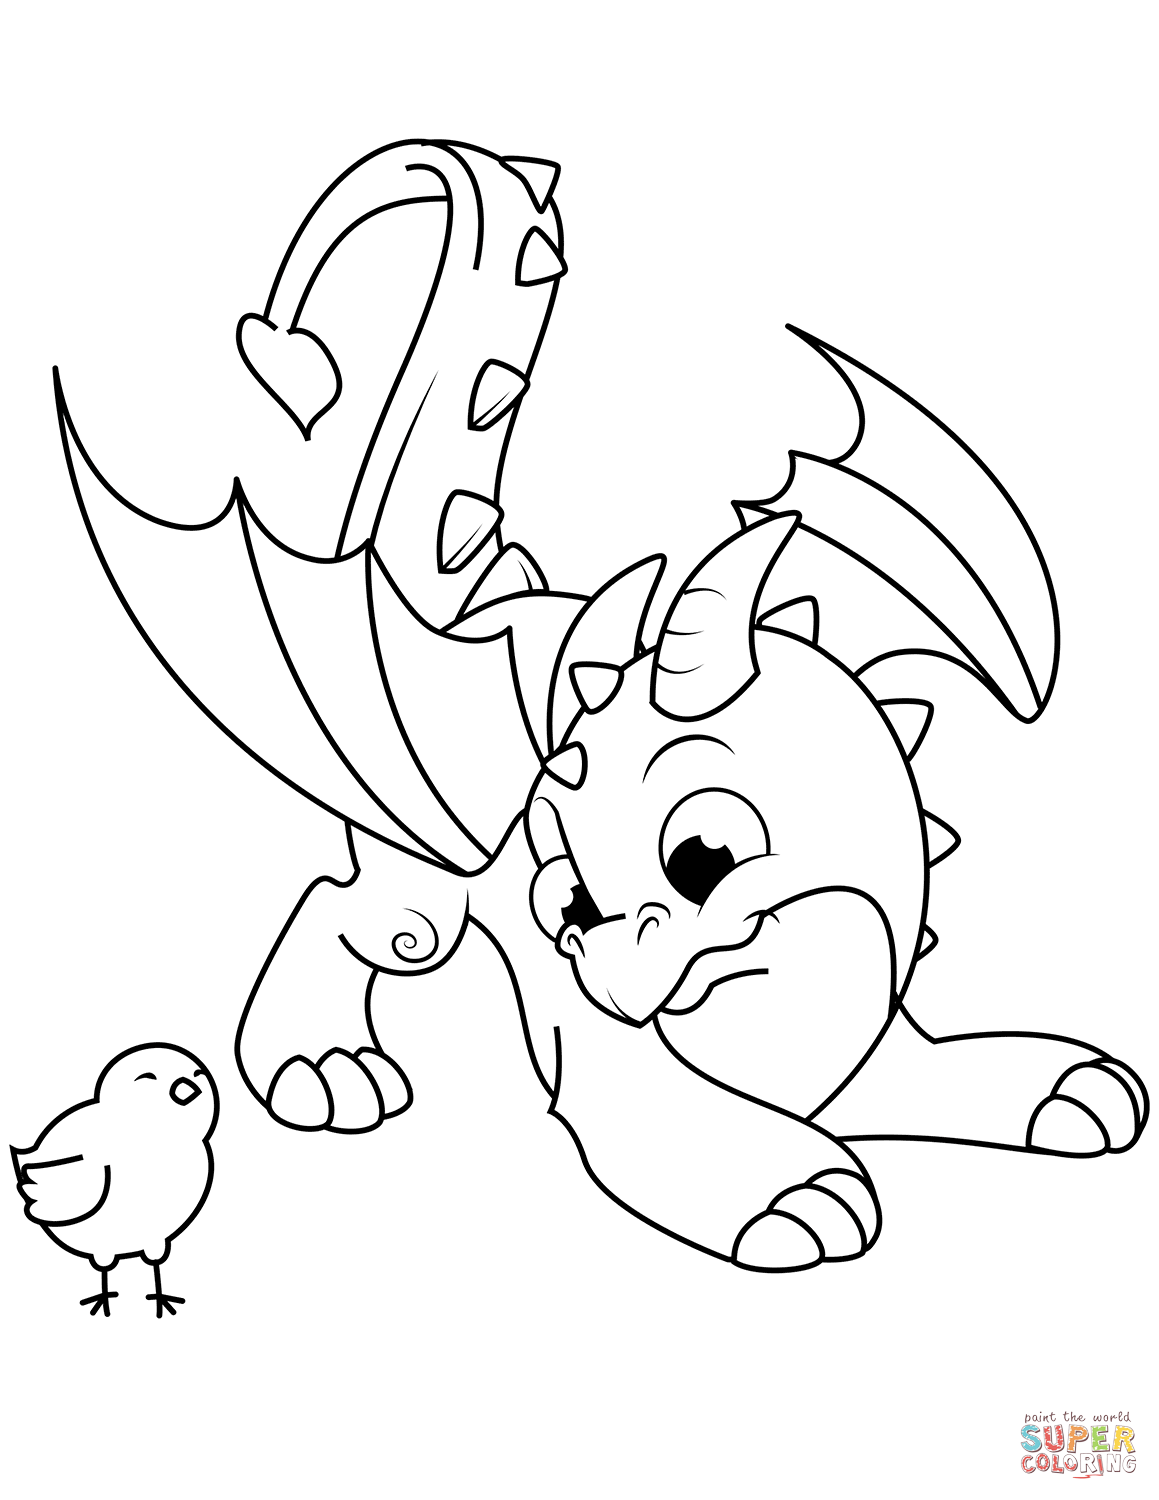 Dragon City Coloring Pages at GetColorings.com  Free printable